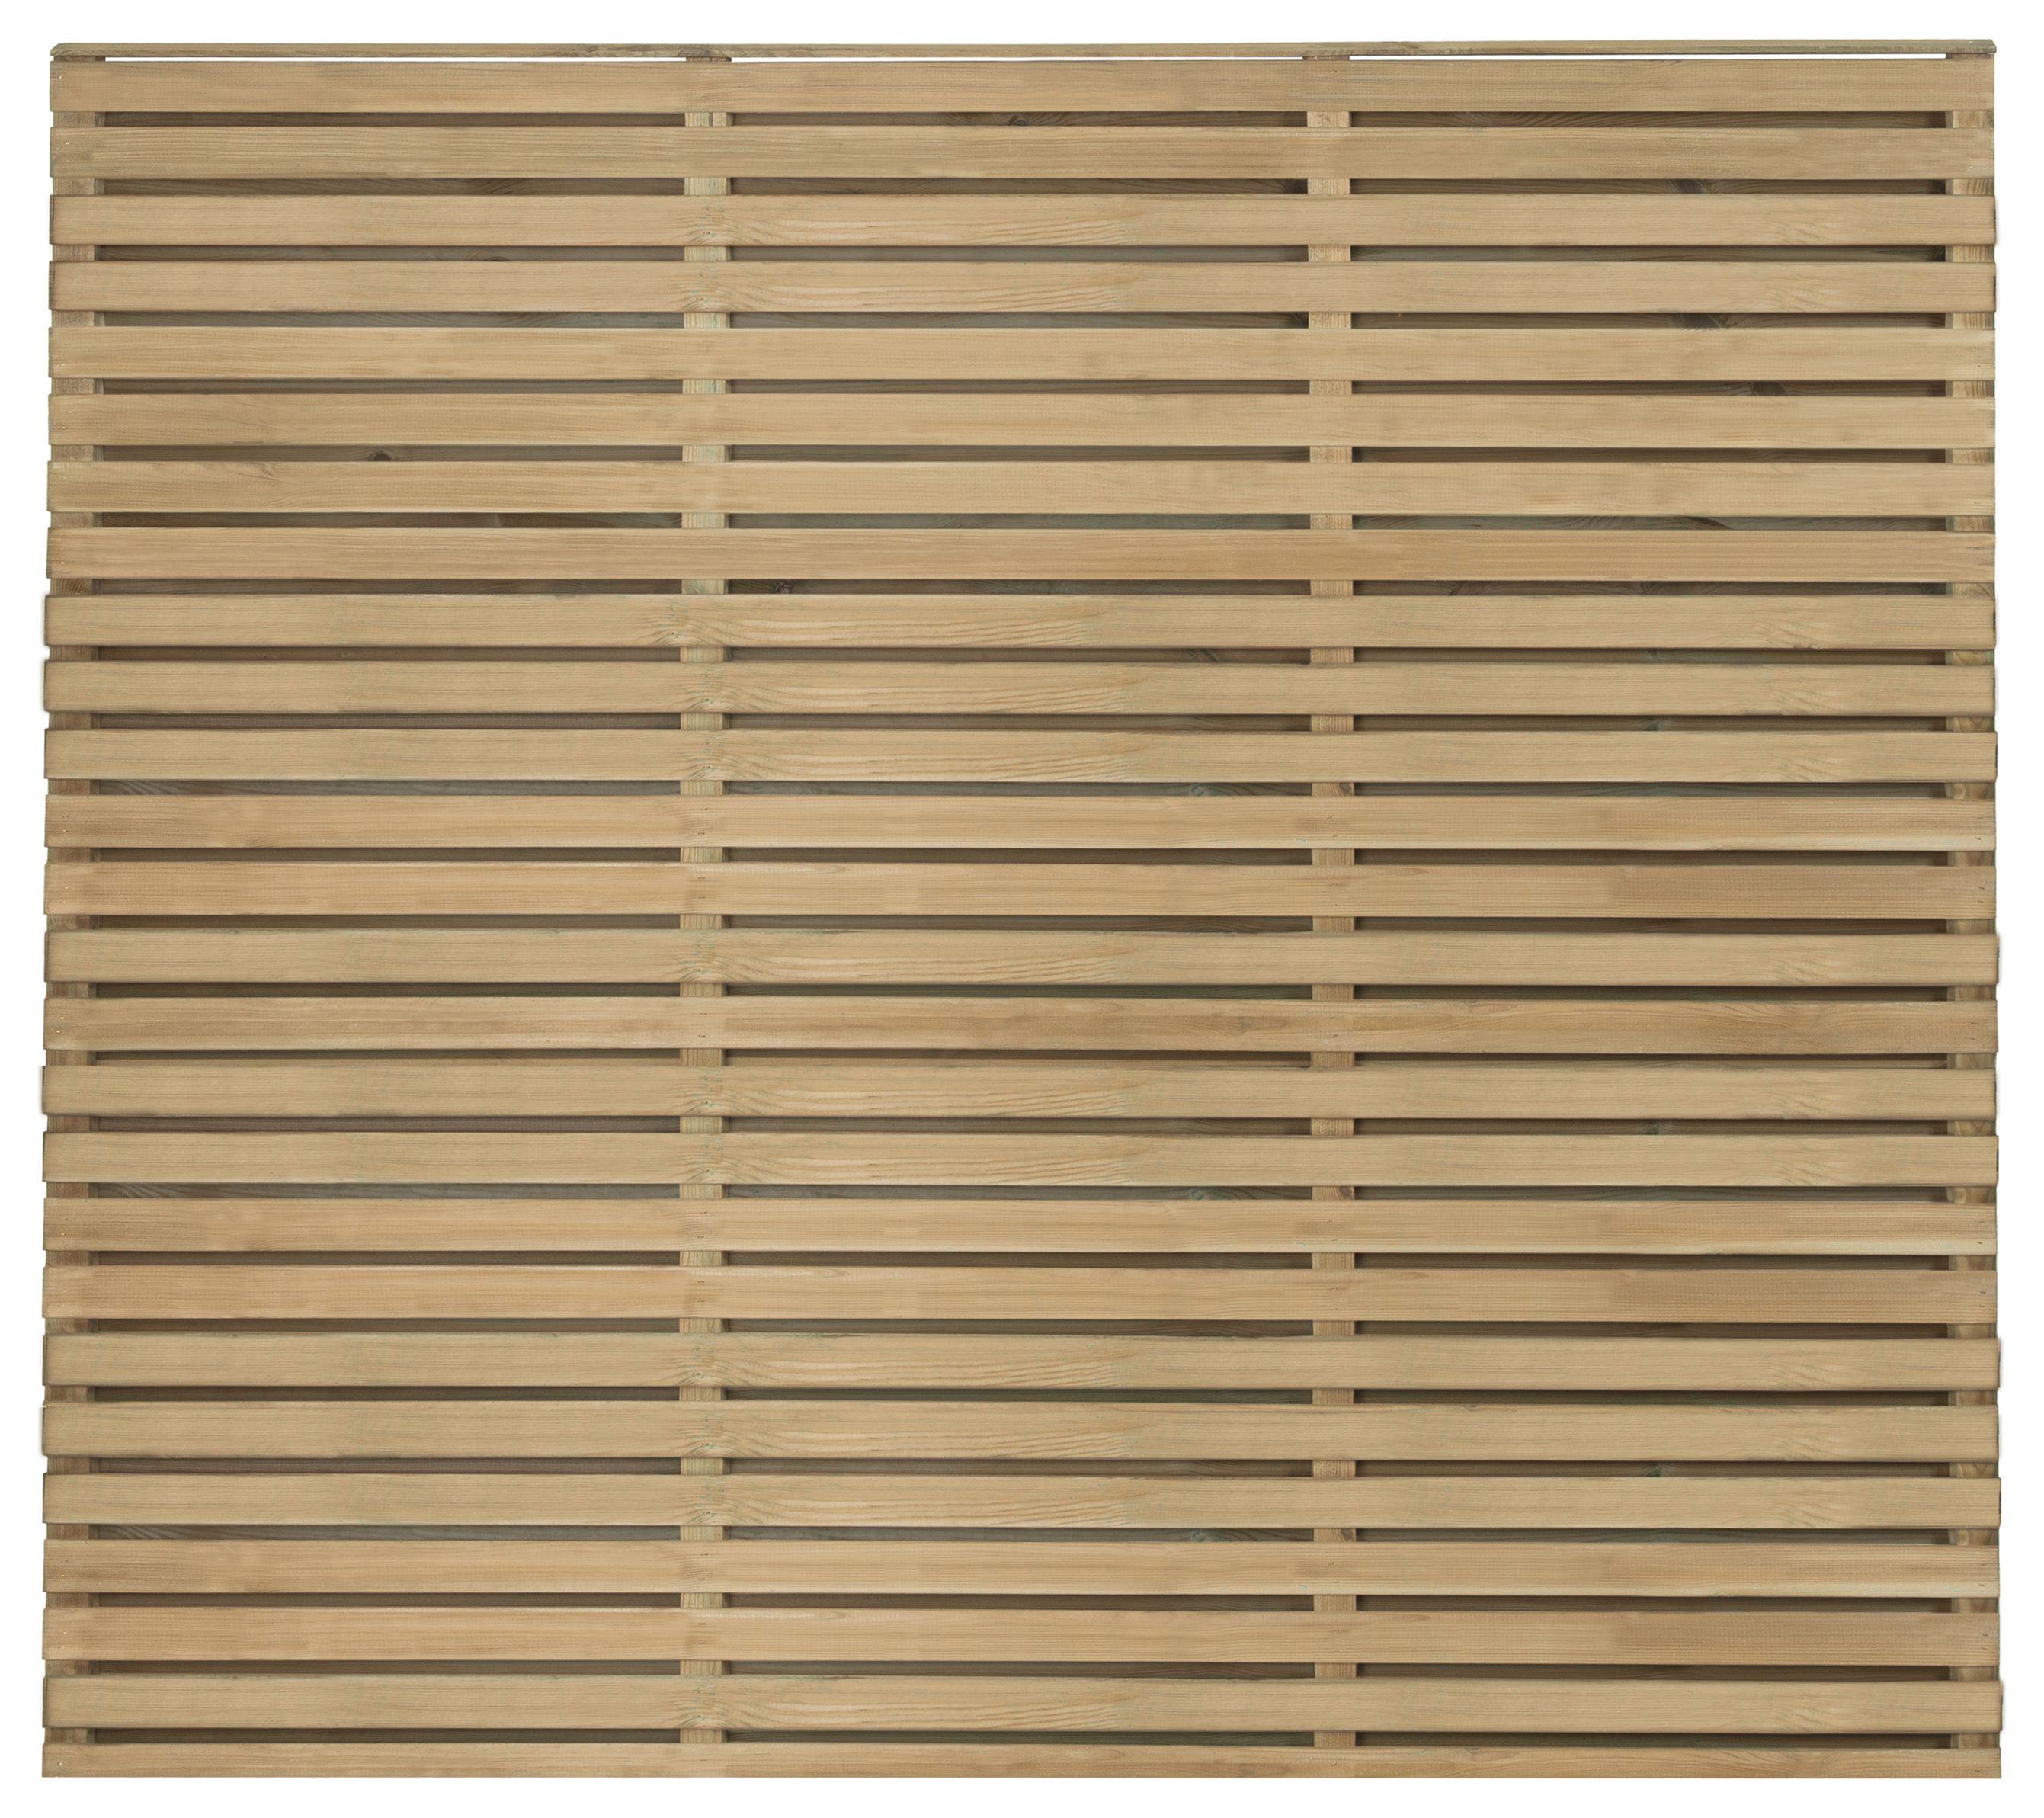 Image of Forest Garden Double Slatted Fence Panel - 1800 x 1500mm - 6 x 5ft - Pack of 4